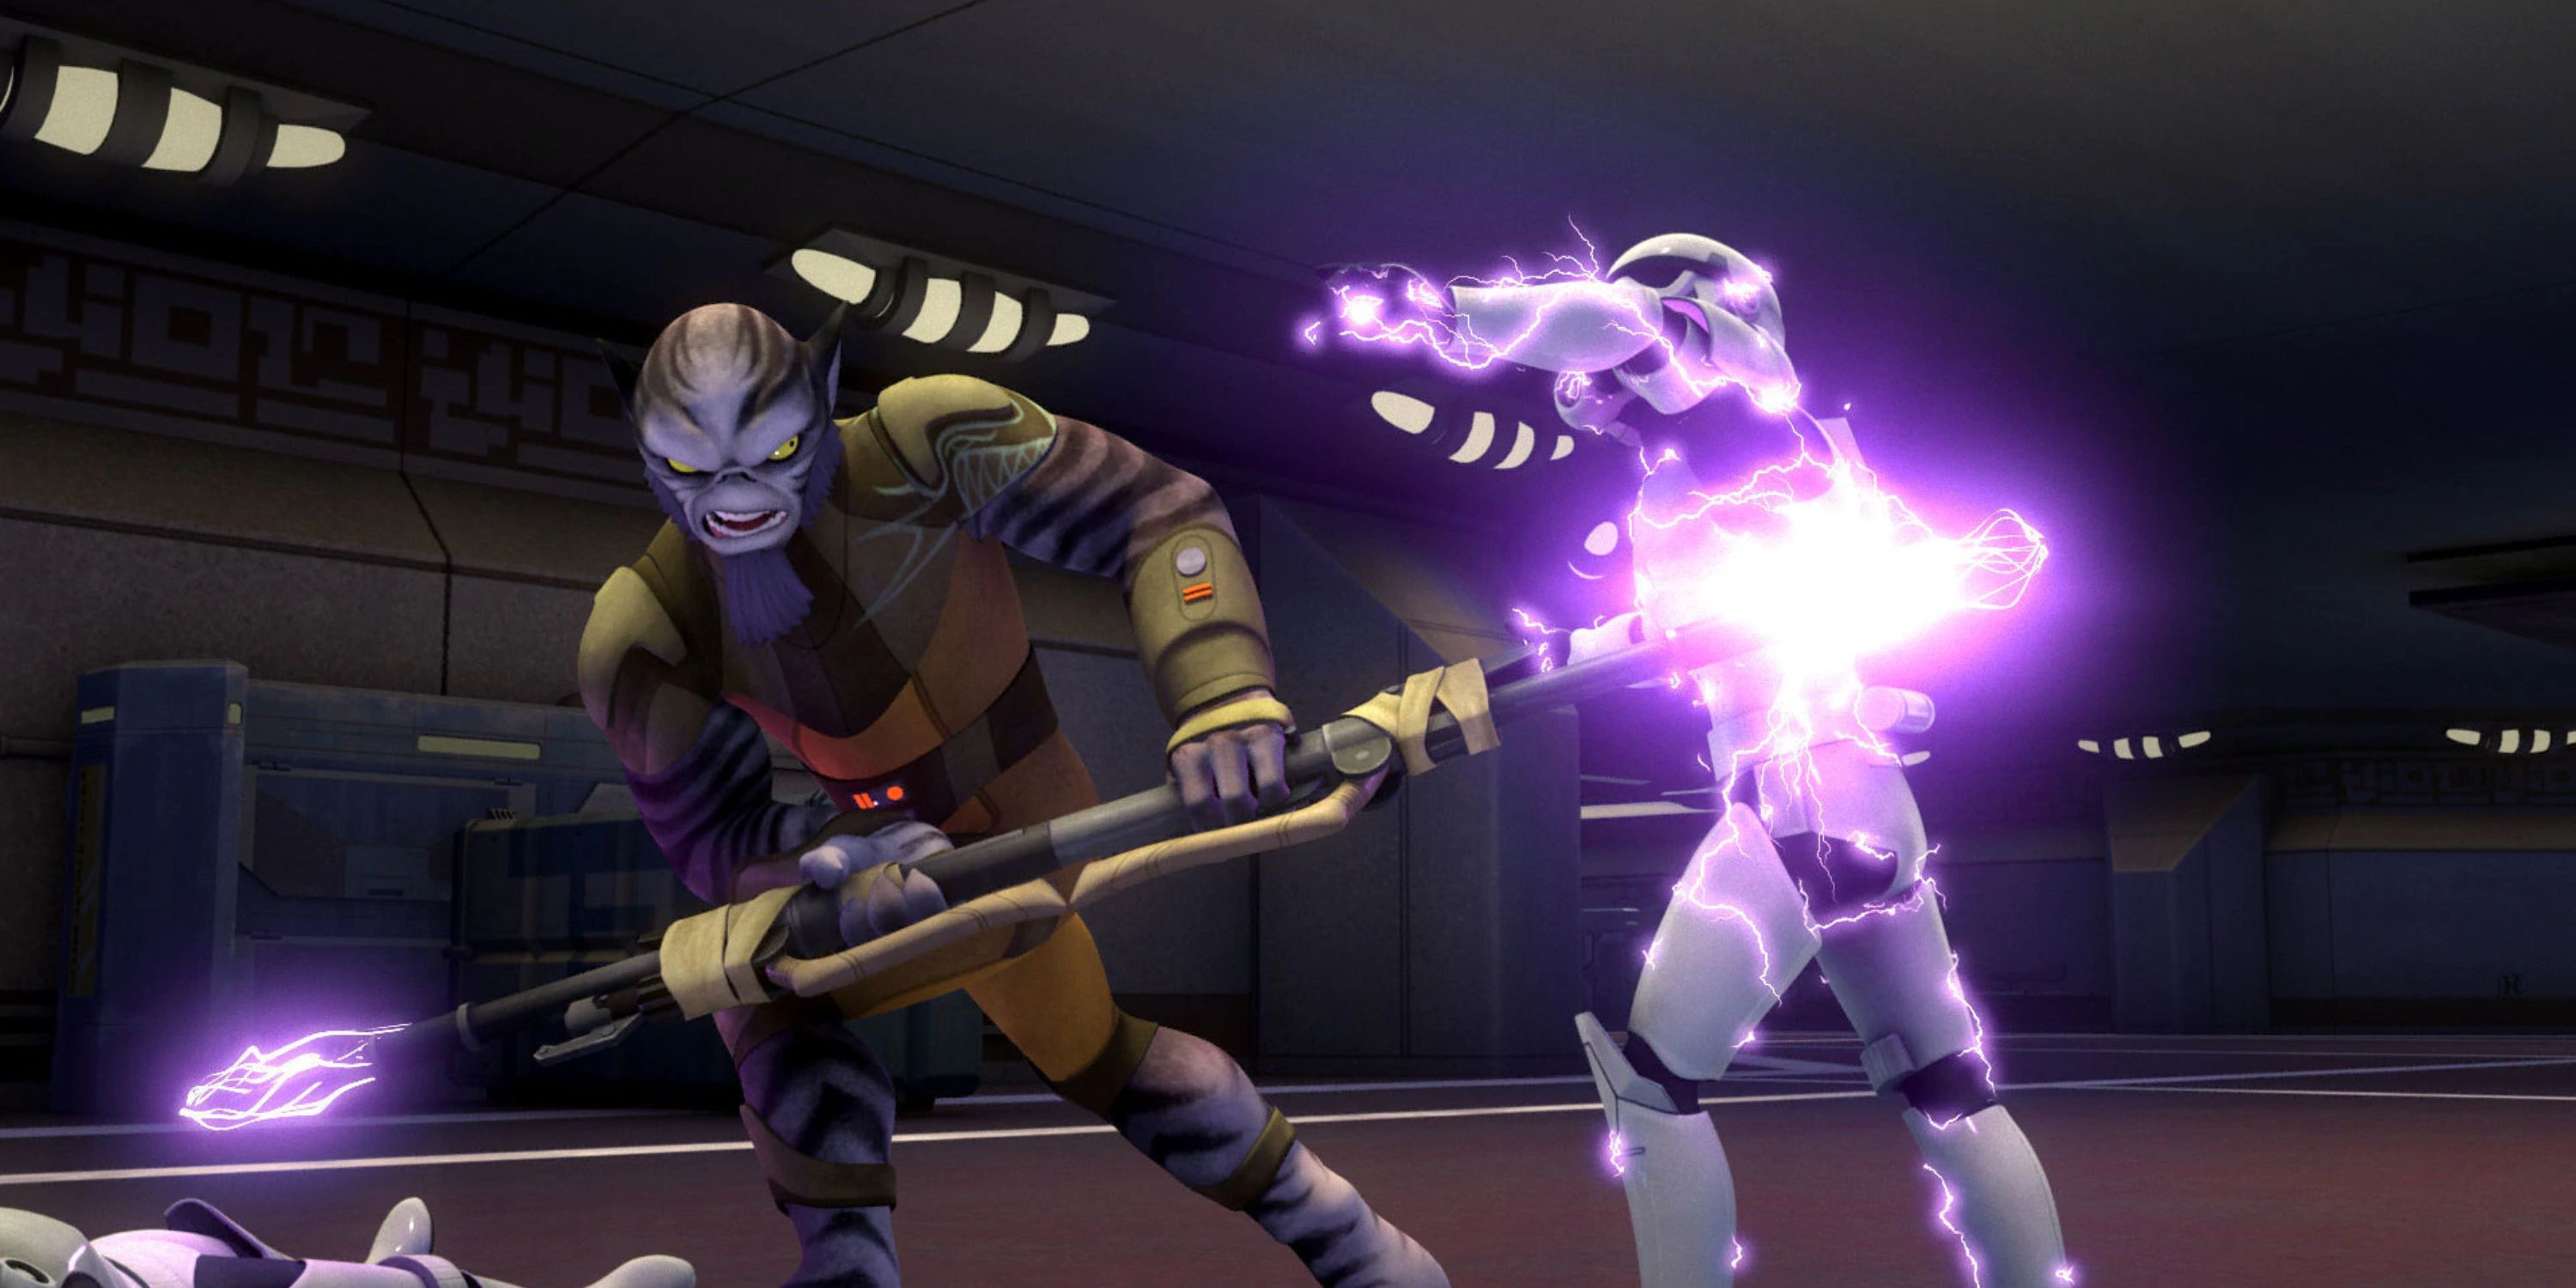 Zeb uses a staff to fight a stormtrooper